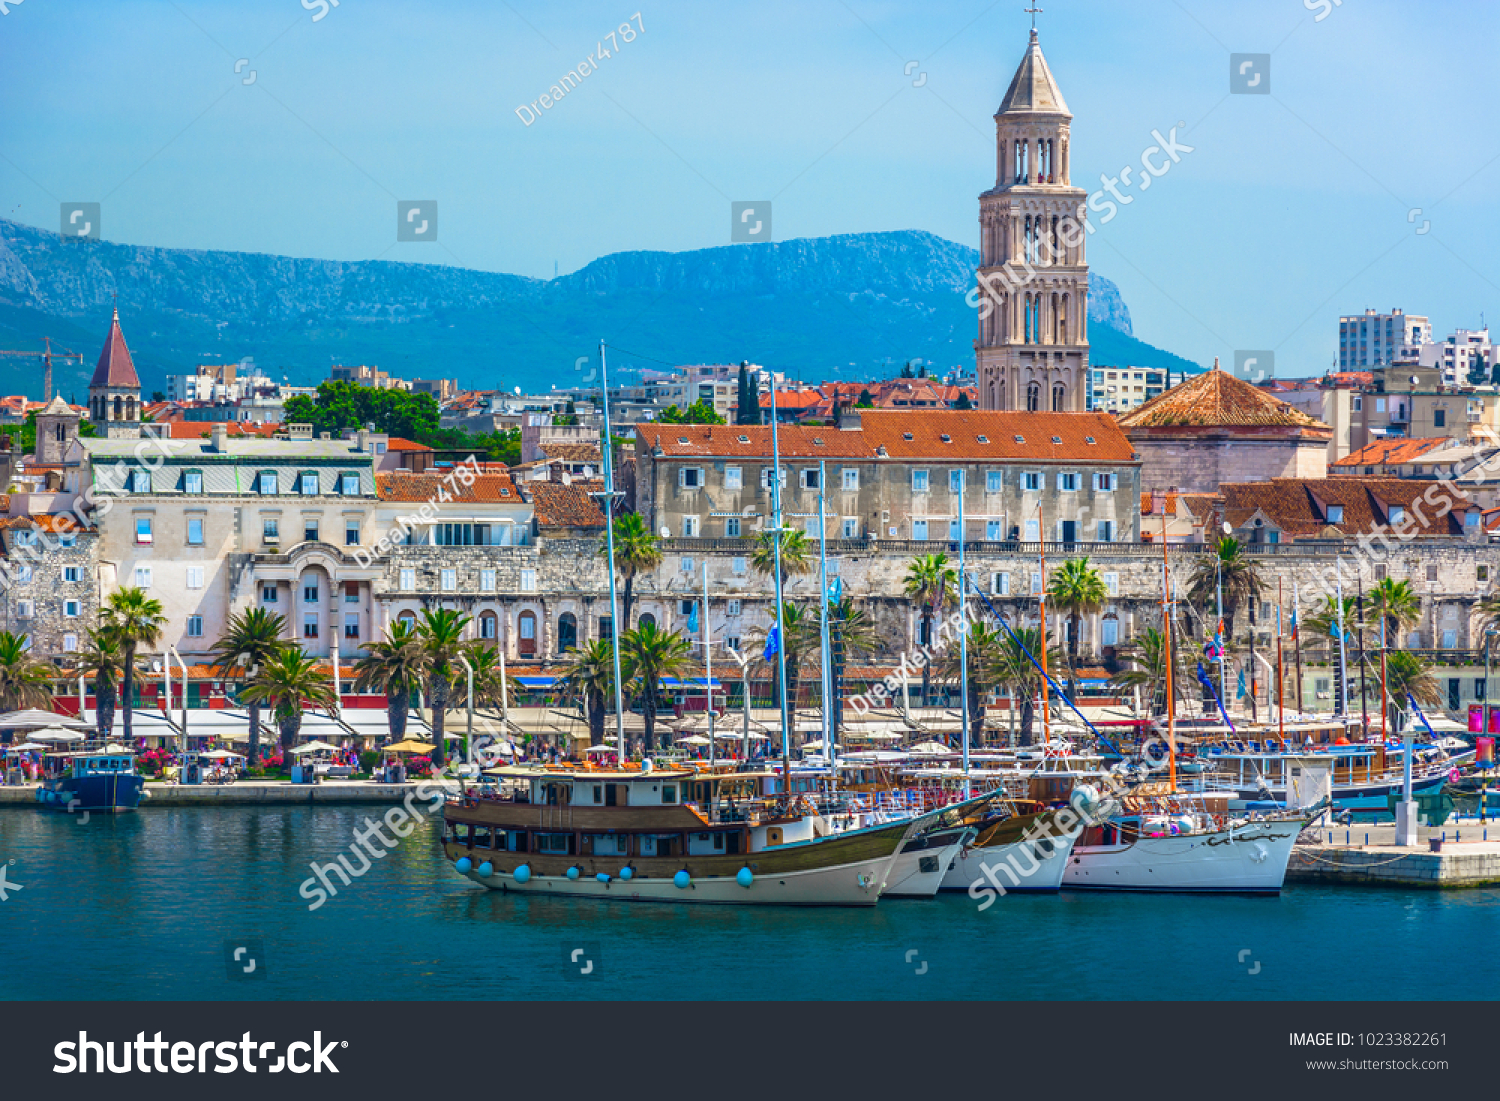 Seafront view at old city center in Split town, Diocletian Palace view from the Adriatic Sea, Croatia. #1023382261